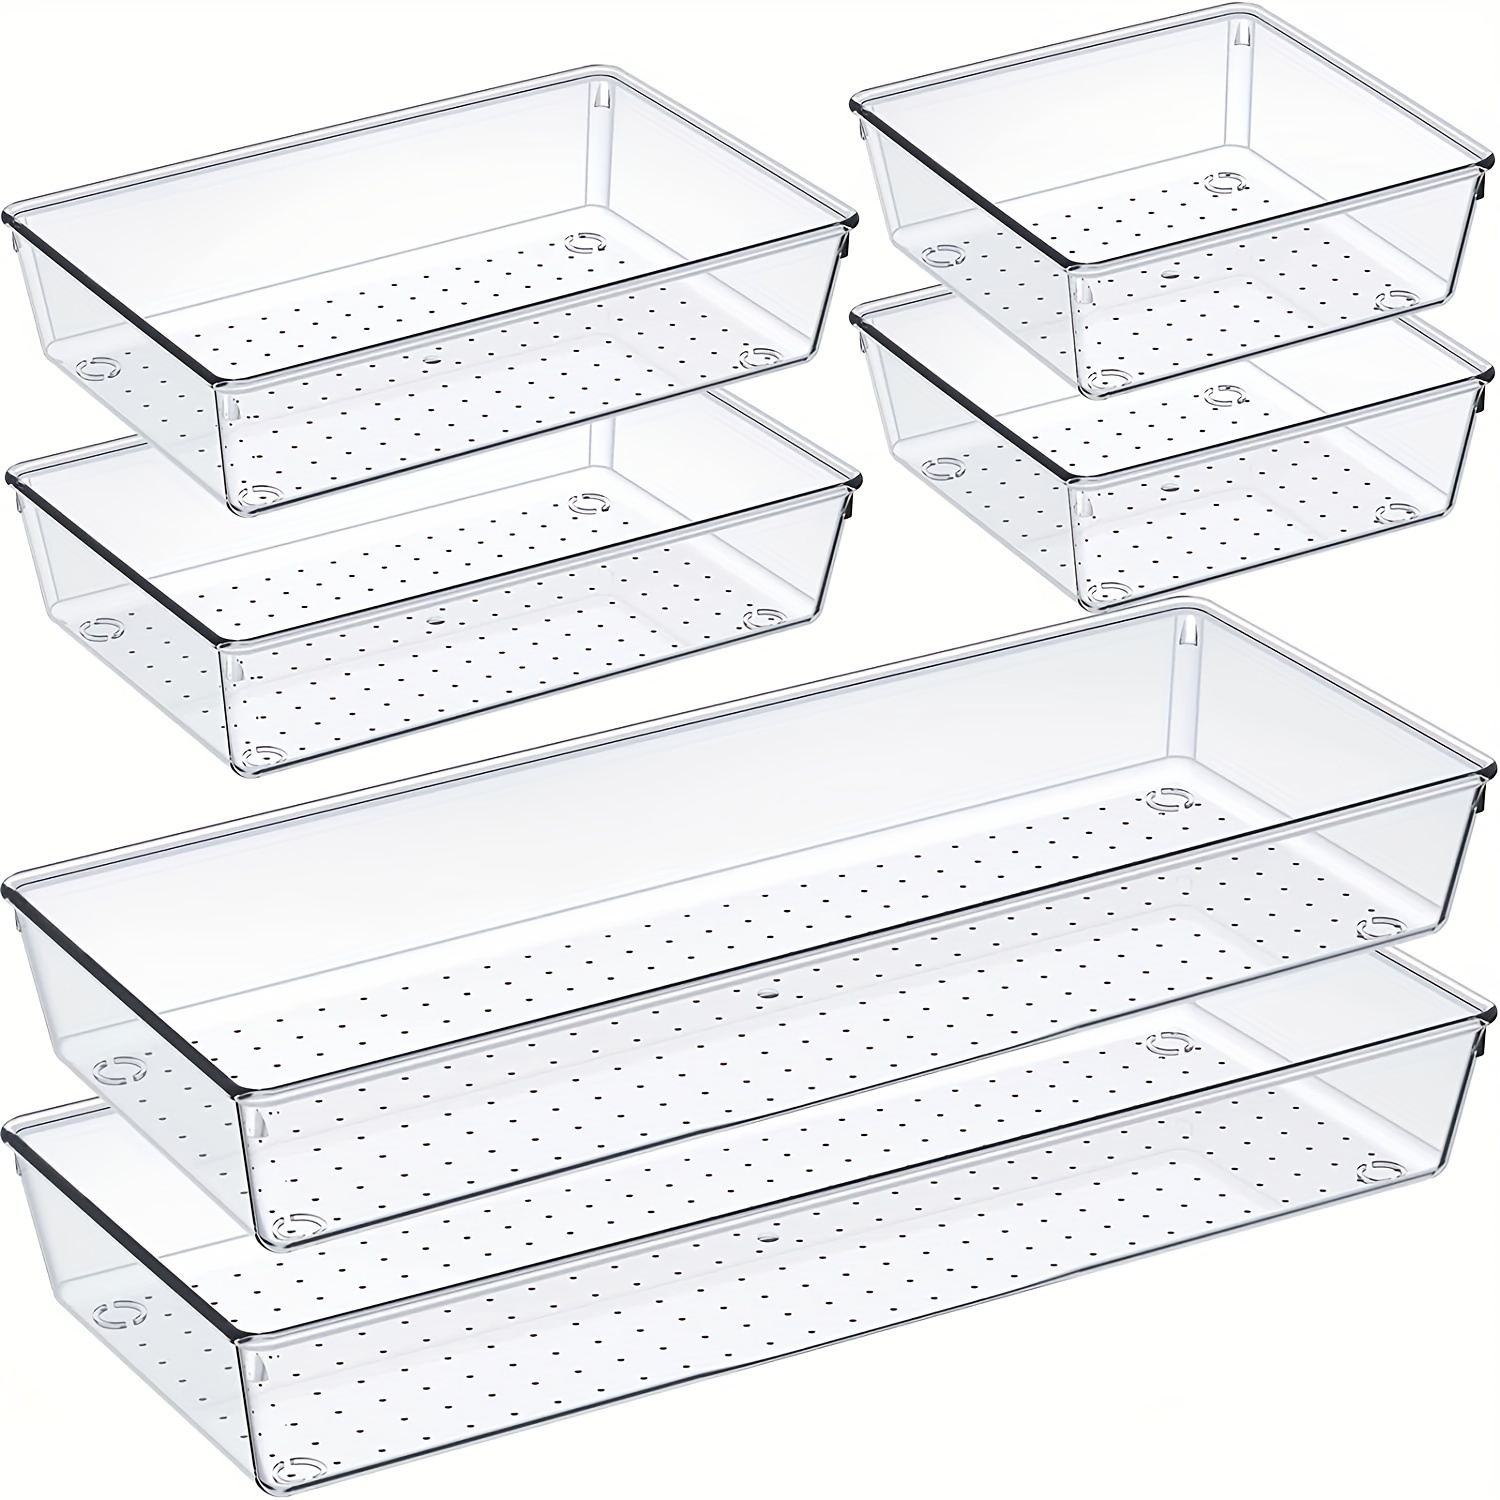 Clear Plastic Vanity and Desk Drawer Organizers Office Storage